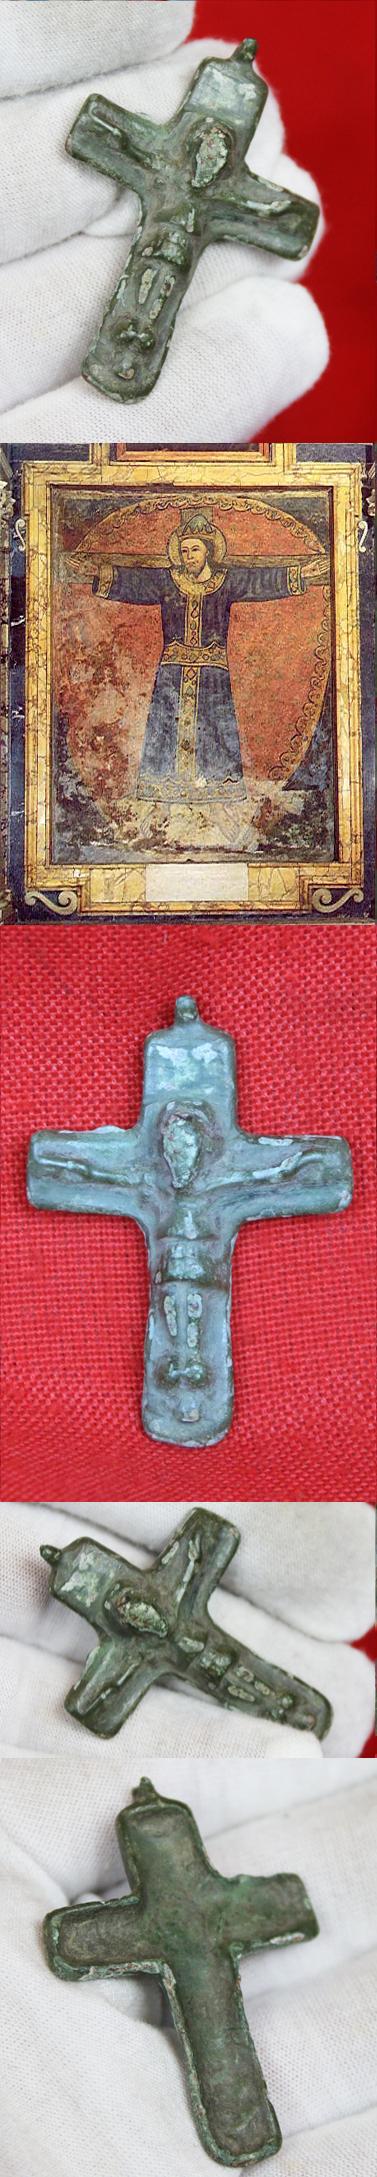 A Beautifully Detailed Ancient Roman Early Christian Crucifix, Byzantine Empire circa 1200 Years Old